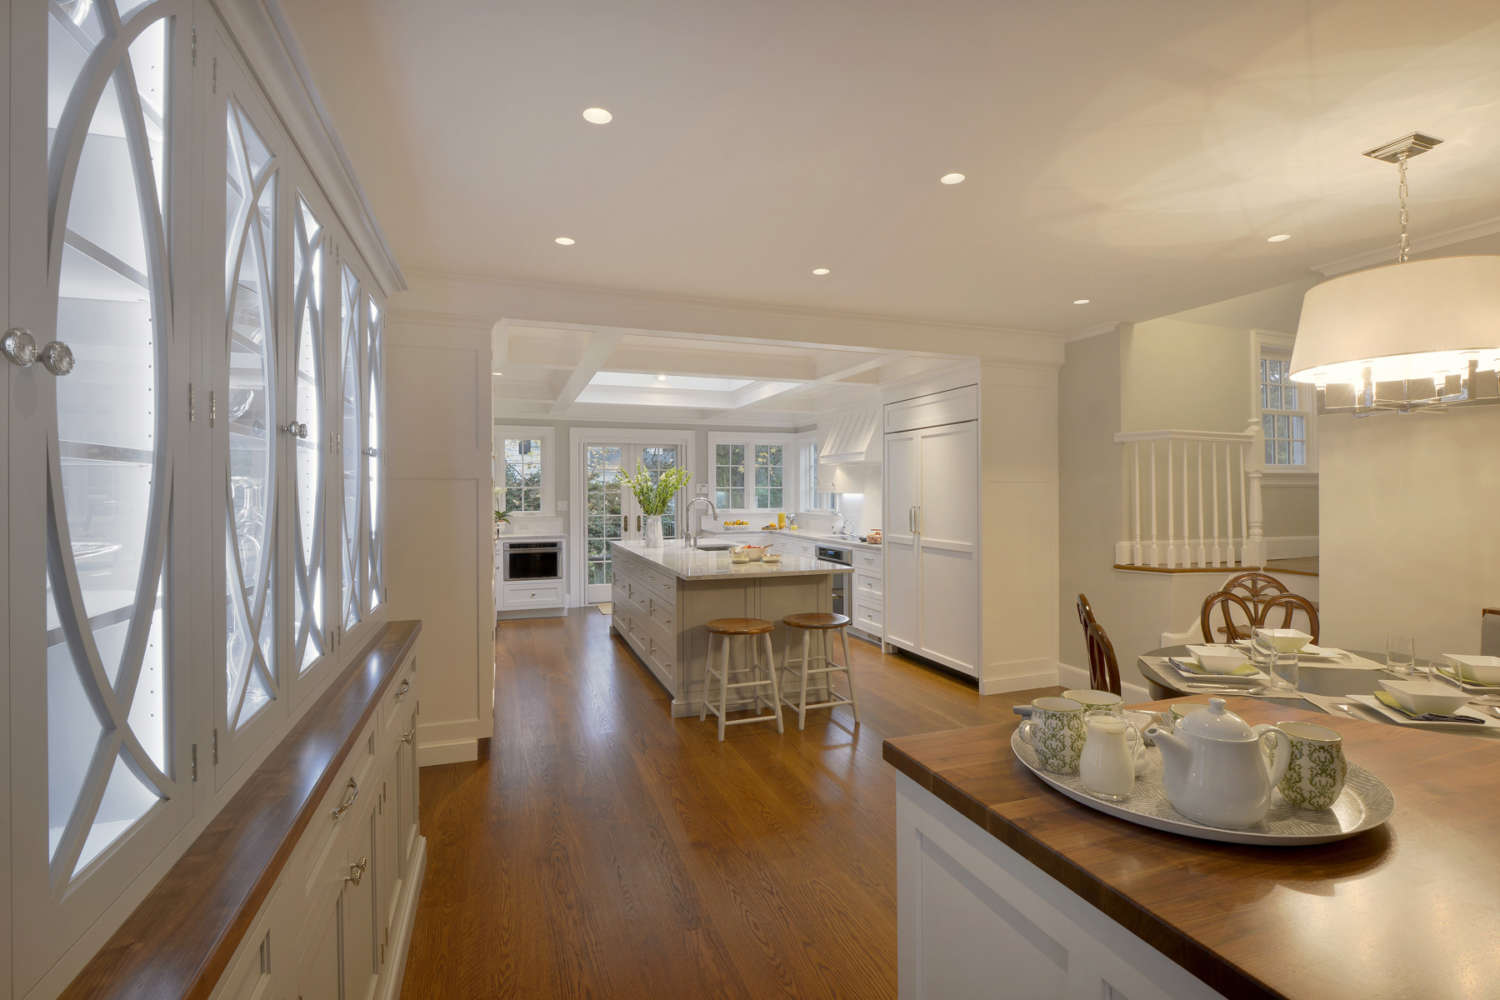 U-shaped Larchmont kitchen features a mix of Rutt Handcrafted cabinets and Rutt Regency cabinets. Kitchen has a large island, hutch, banquet area, white painted cabinets and natural oak flooring, and opens up into living room. Designed by Fabrice Garson of Bilotta Kitchens.